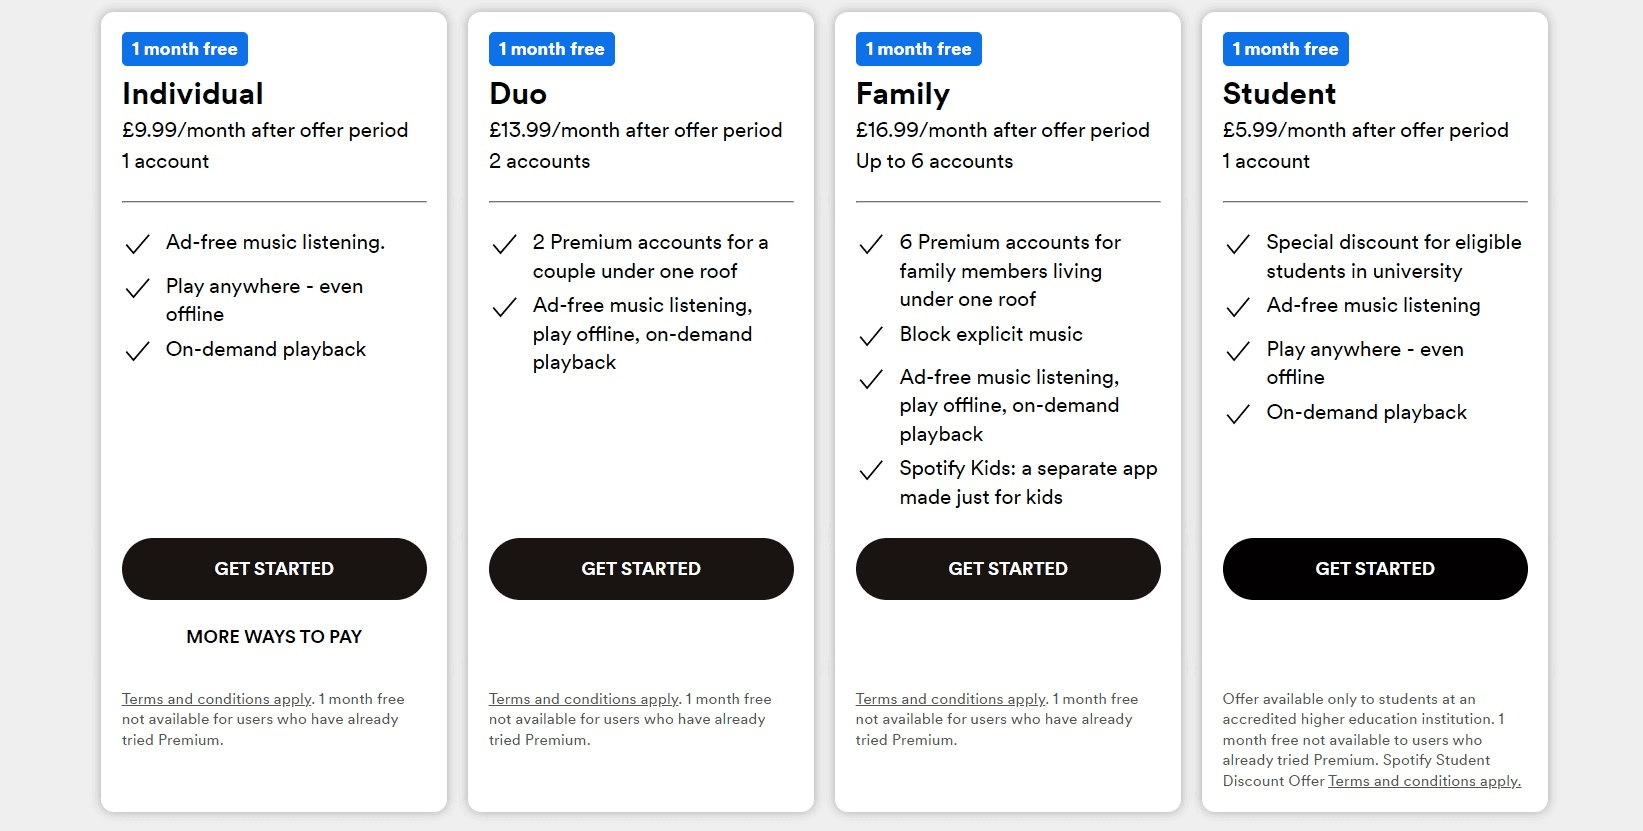 Spotify plans and prices